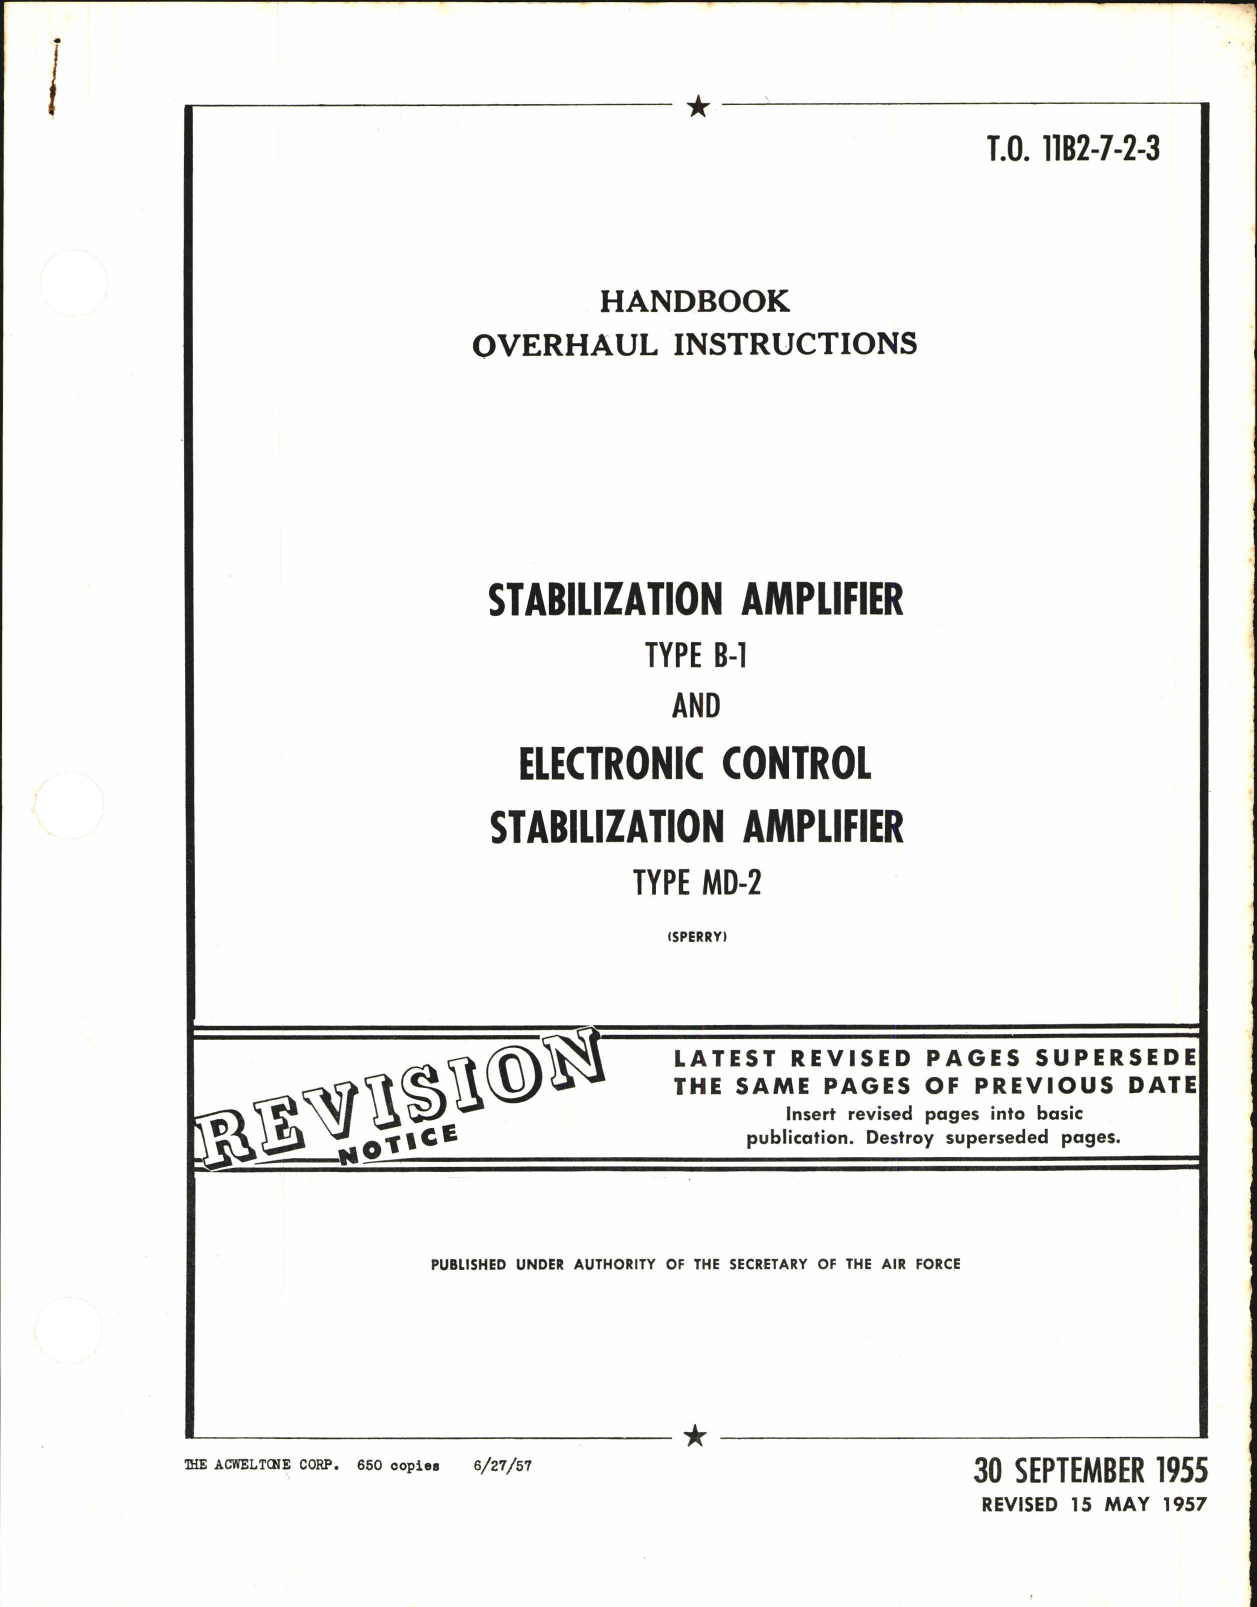 Sample page 1 from AirCorps Library document: Overhaul Instructions for Stabilization Amplifier Type B-1 and Electronic Control Stabilization Amplifier Type MD-2